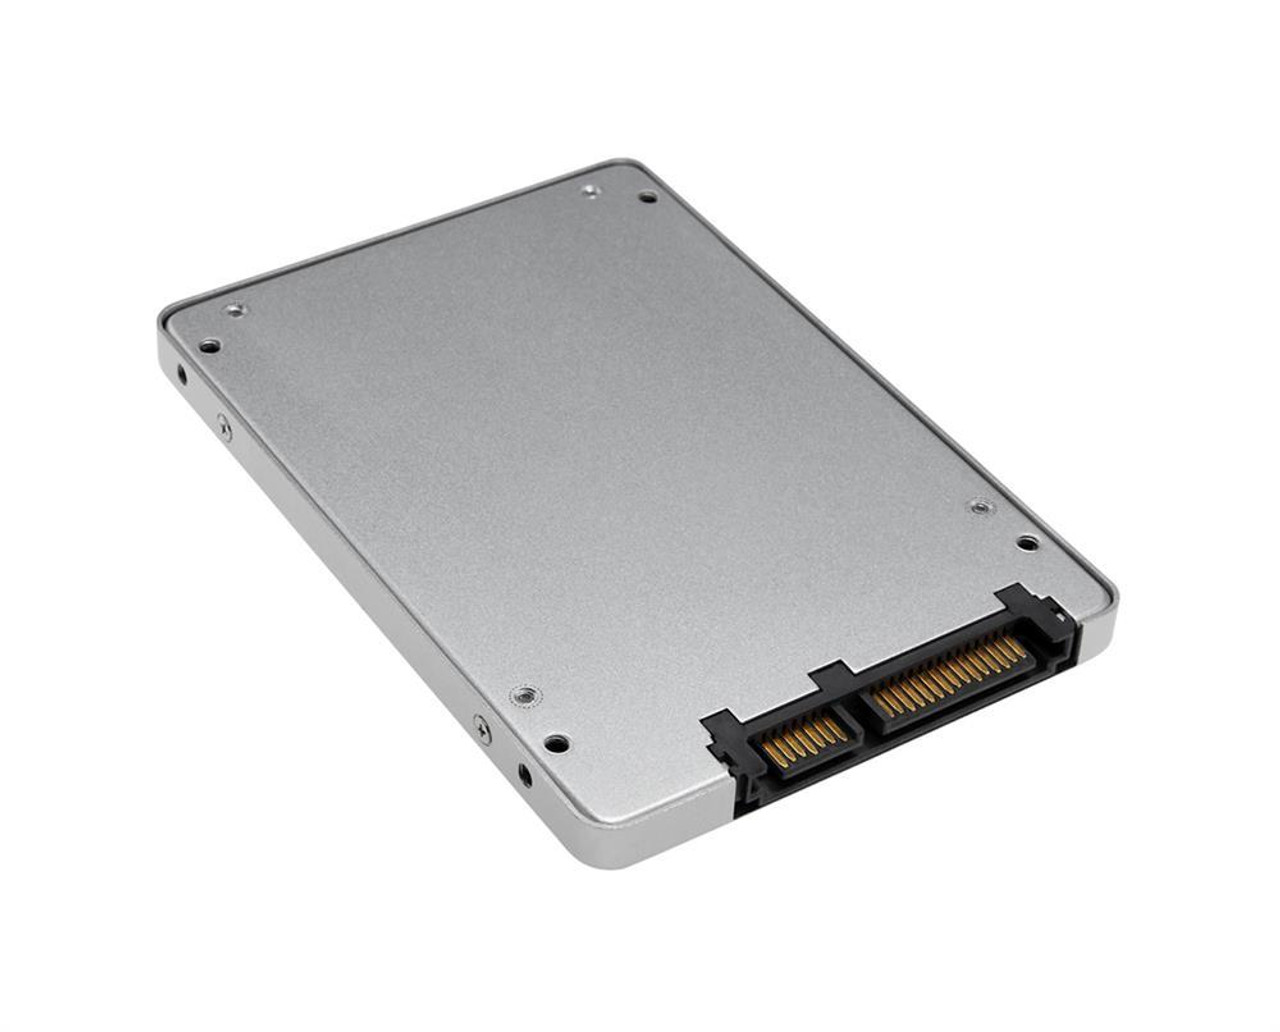 03B01-00020900 ASUS 256GB SATA 6Gbps 2.5-inch Internal Solid State Drive (SSD)